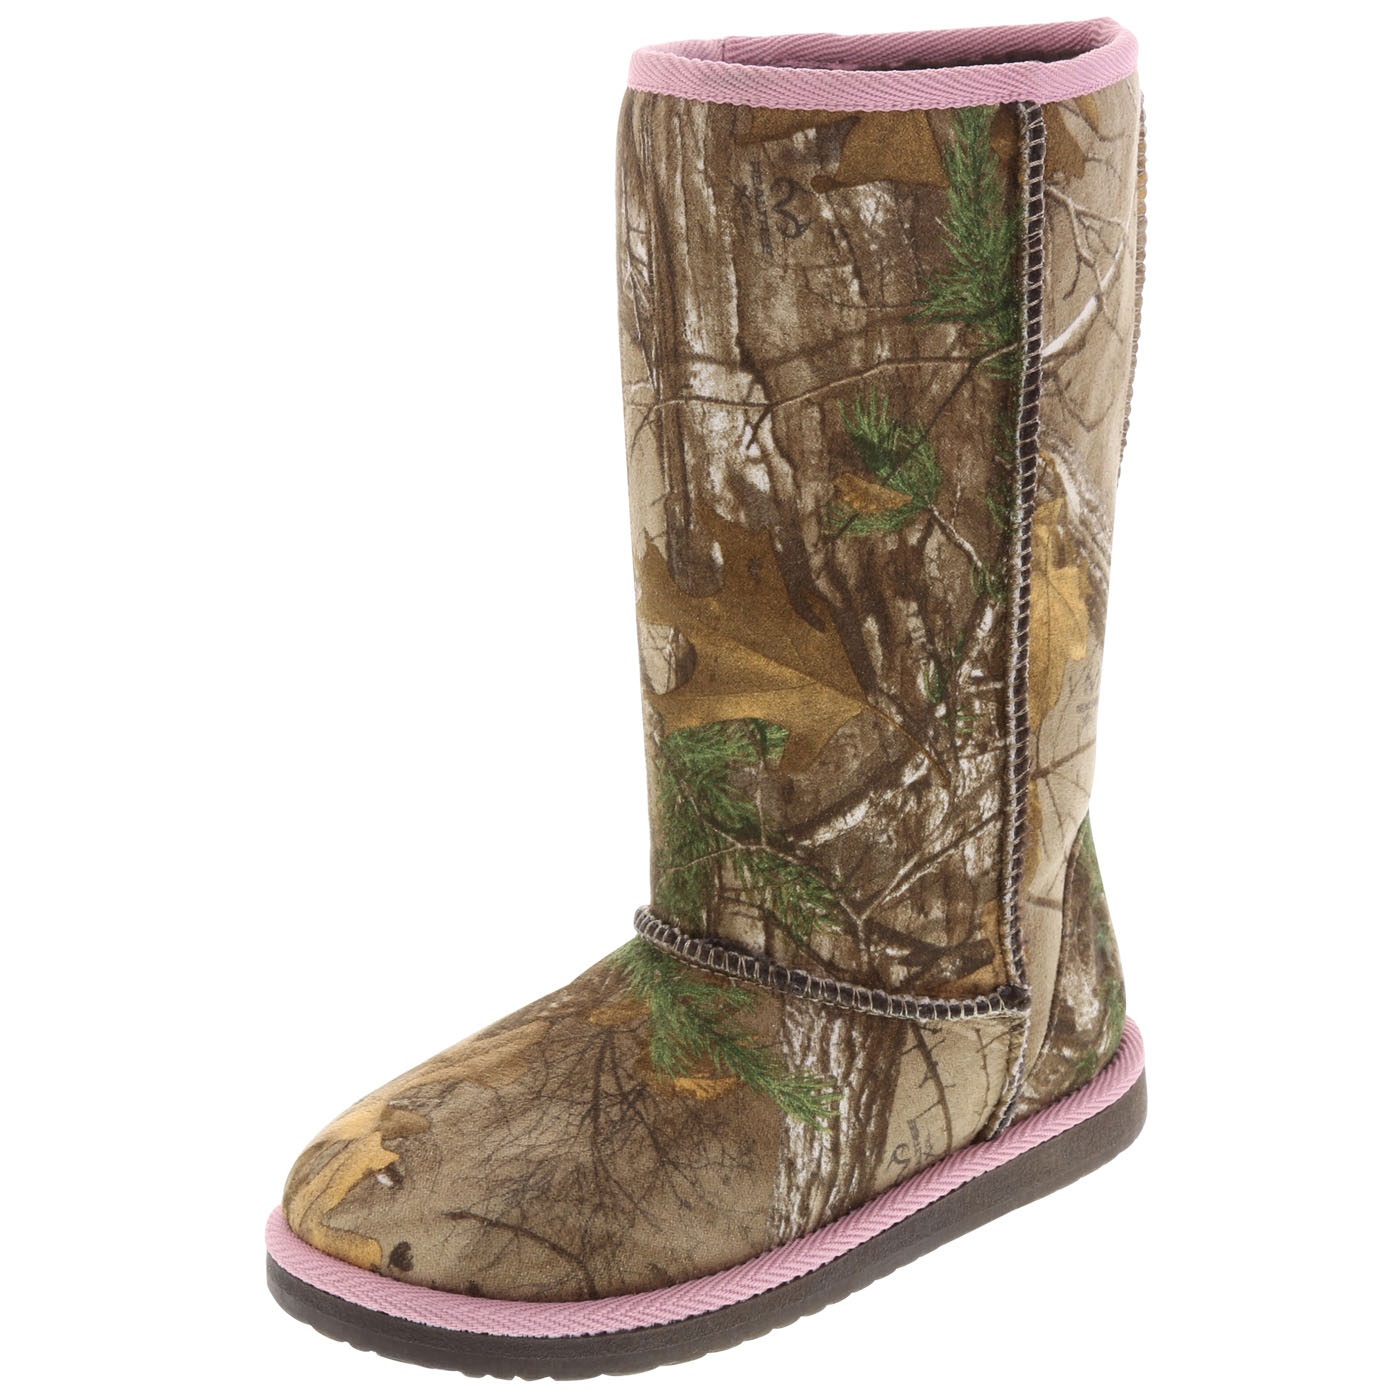 Payless Camo Shoes for Women and Girls OutdoorHub